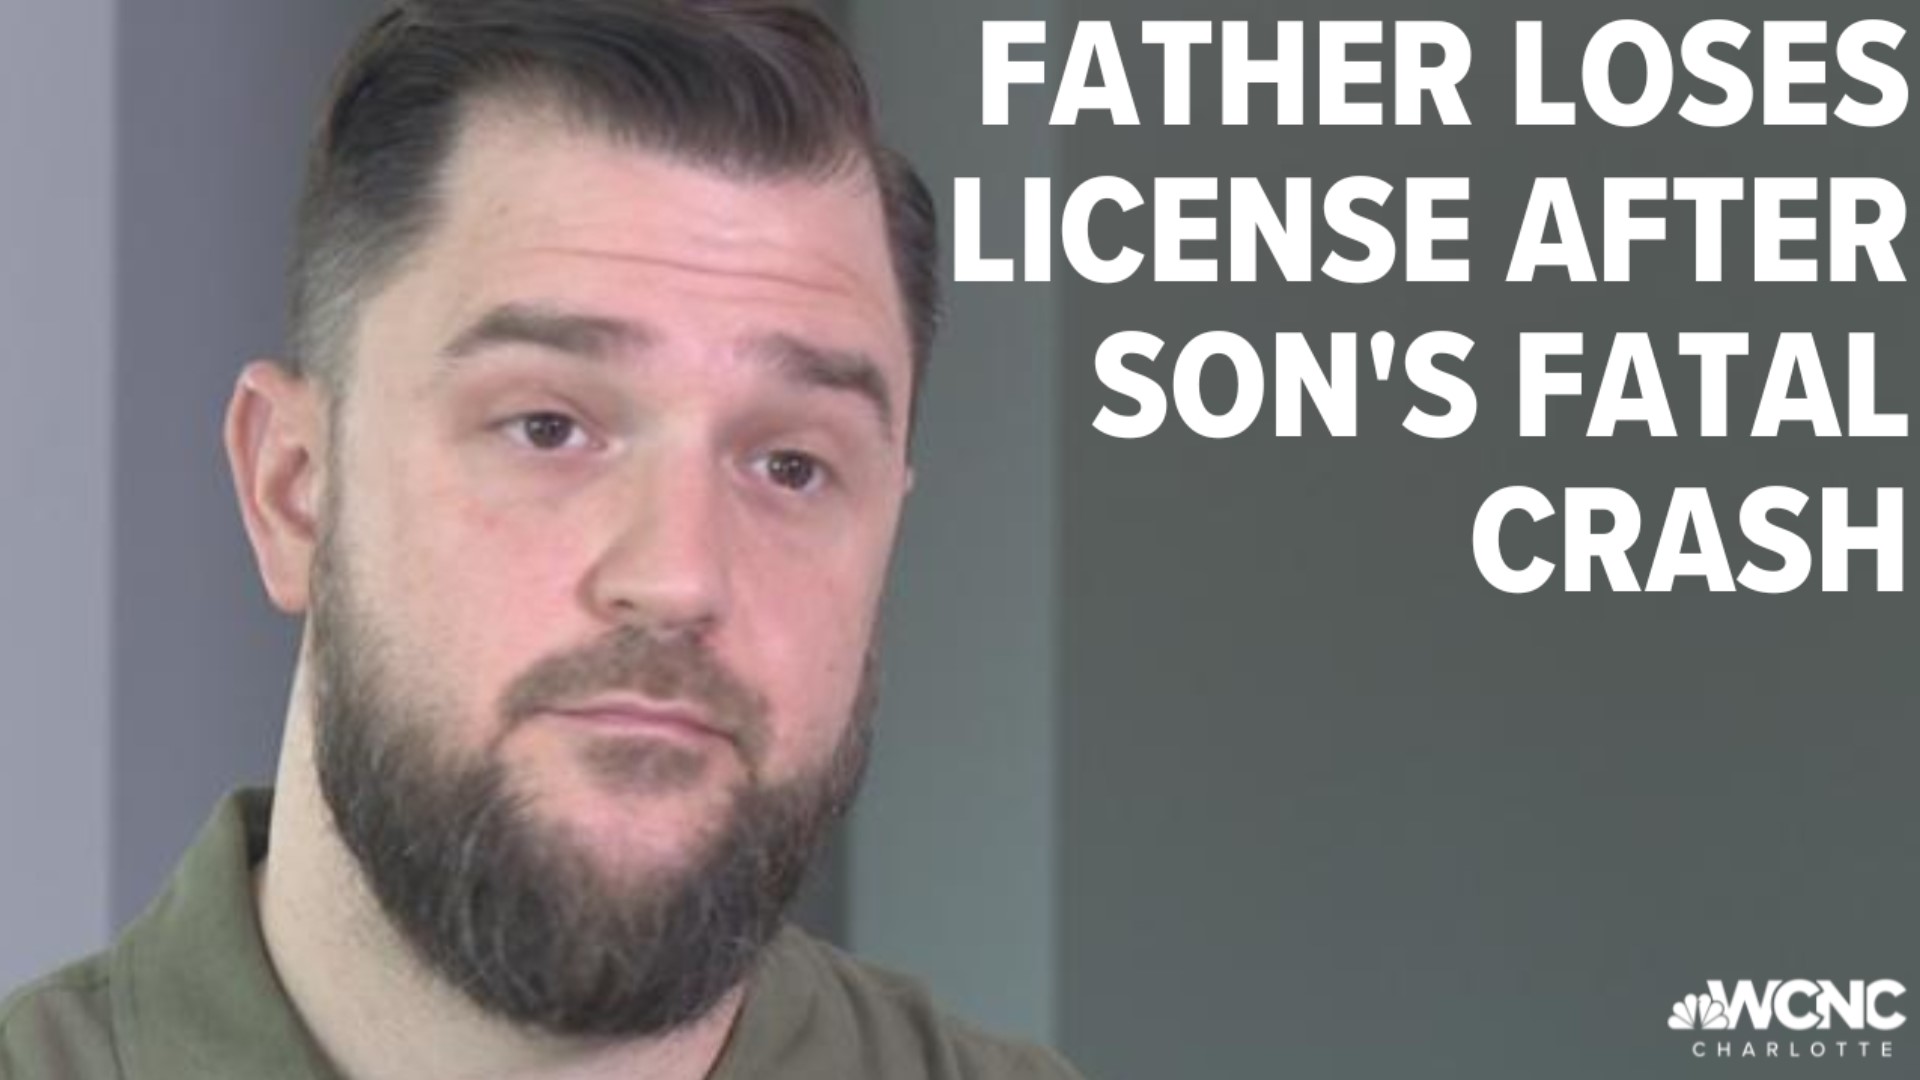 Jacob Twisdale lost everything when his son Evan died in a wreck. Nearly two years later, Jacob's license was suspended and to get it back he'd have to pay $20,000.